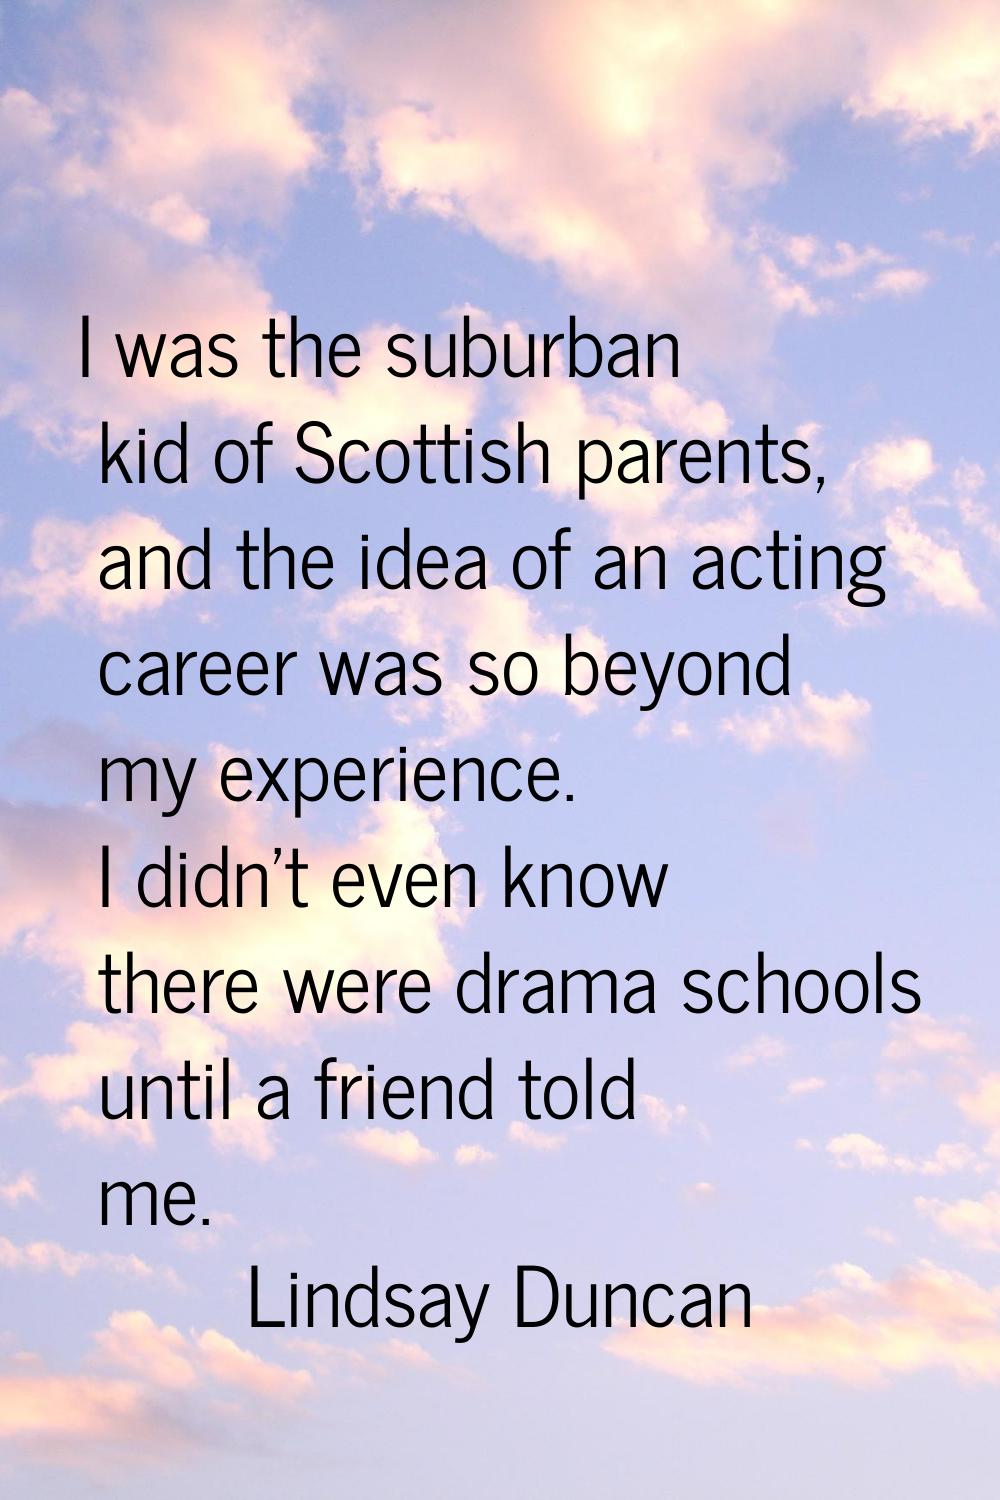 I was the suburban kid of Scottish parents, and the idea of an acting career was so beyond my exper